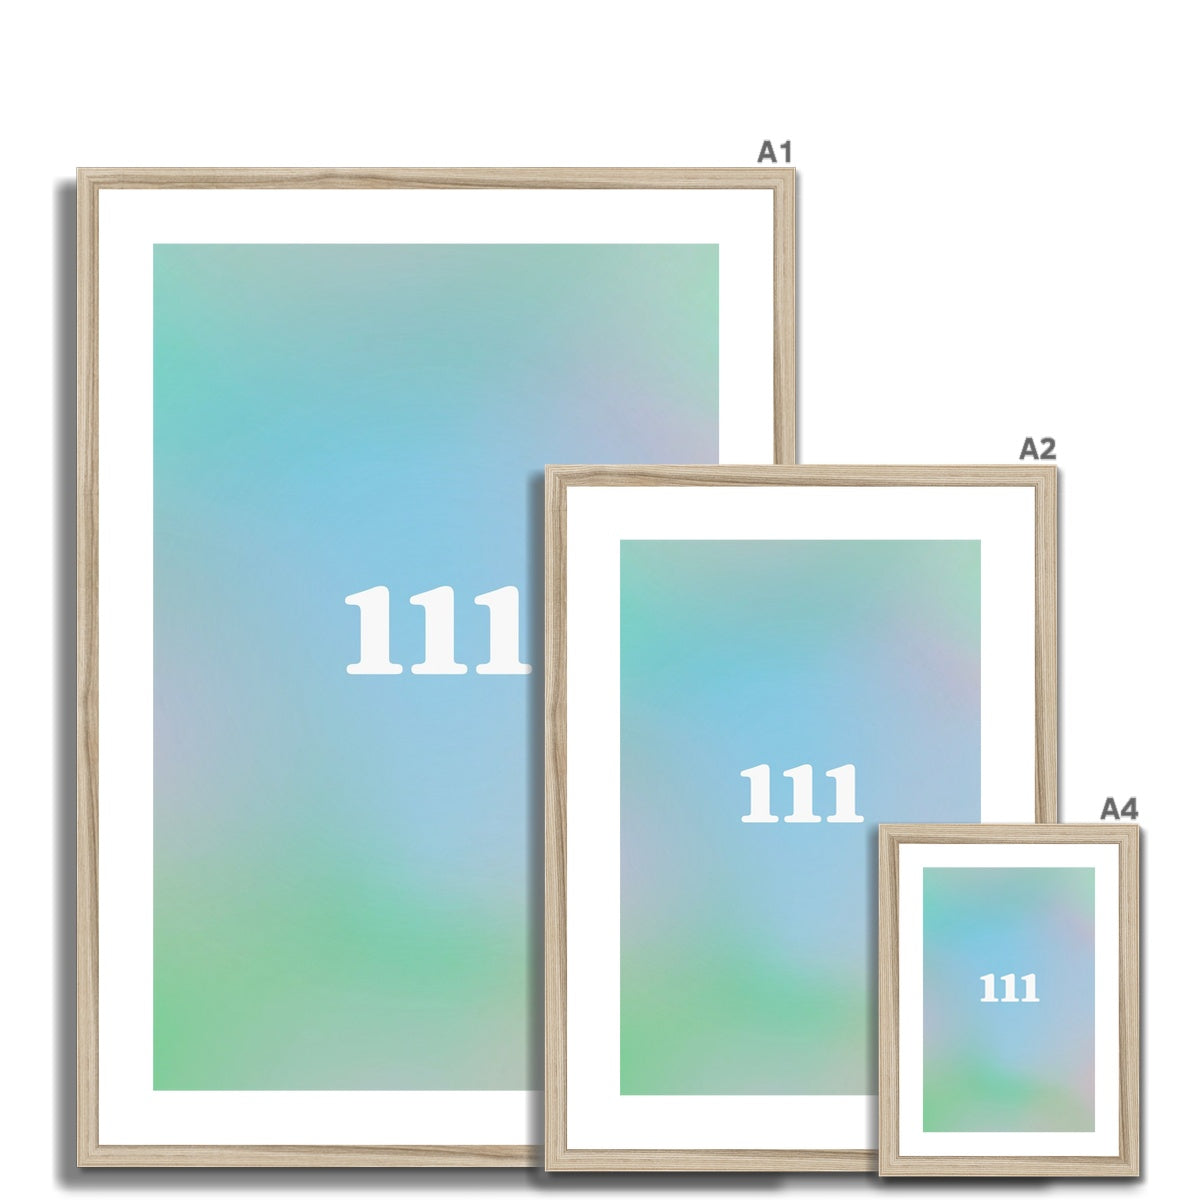 An angel number art print with a gradient aura. Add a touch of angel energy to your walls with a angel number auras. The perfect wall art posters to create a soft and dreamy aesthetic with your apartment or dorm decor. 111 Intuition: Trust Your Gut & Listen To Your Heart